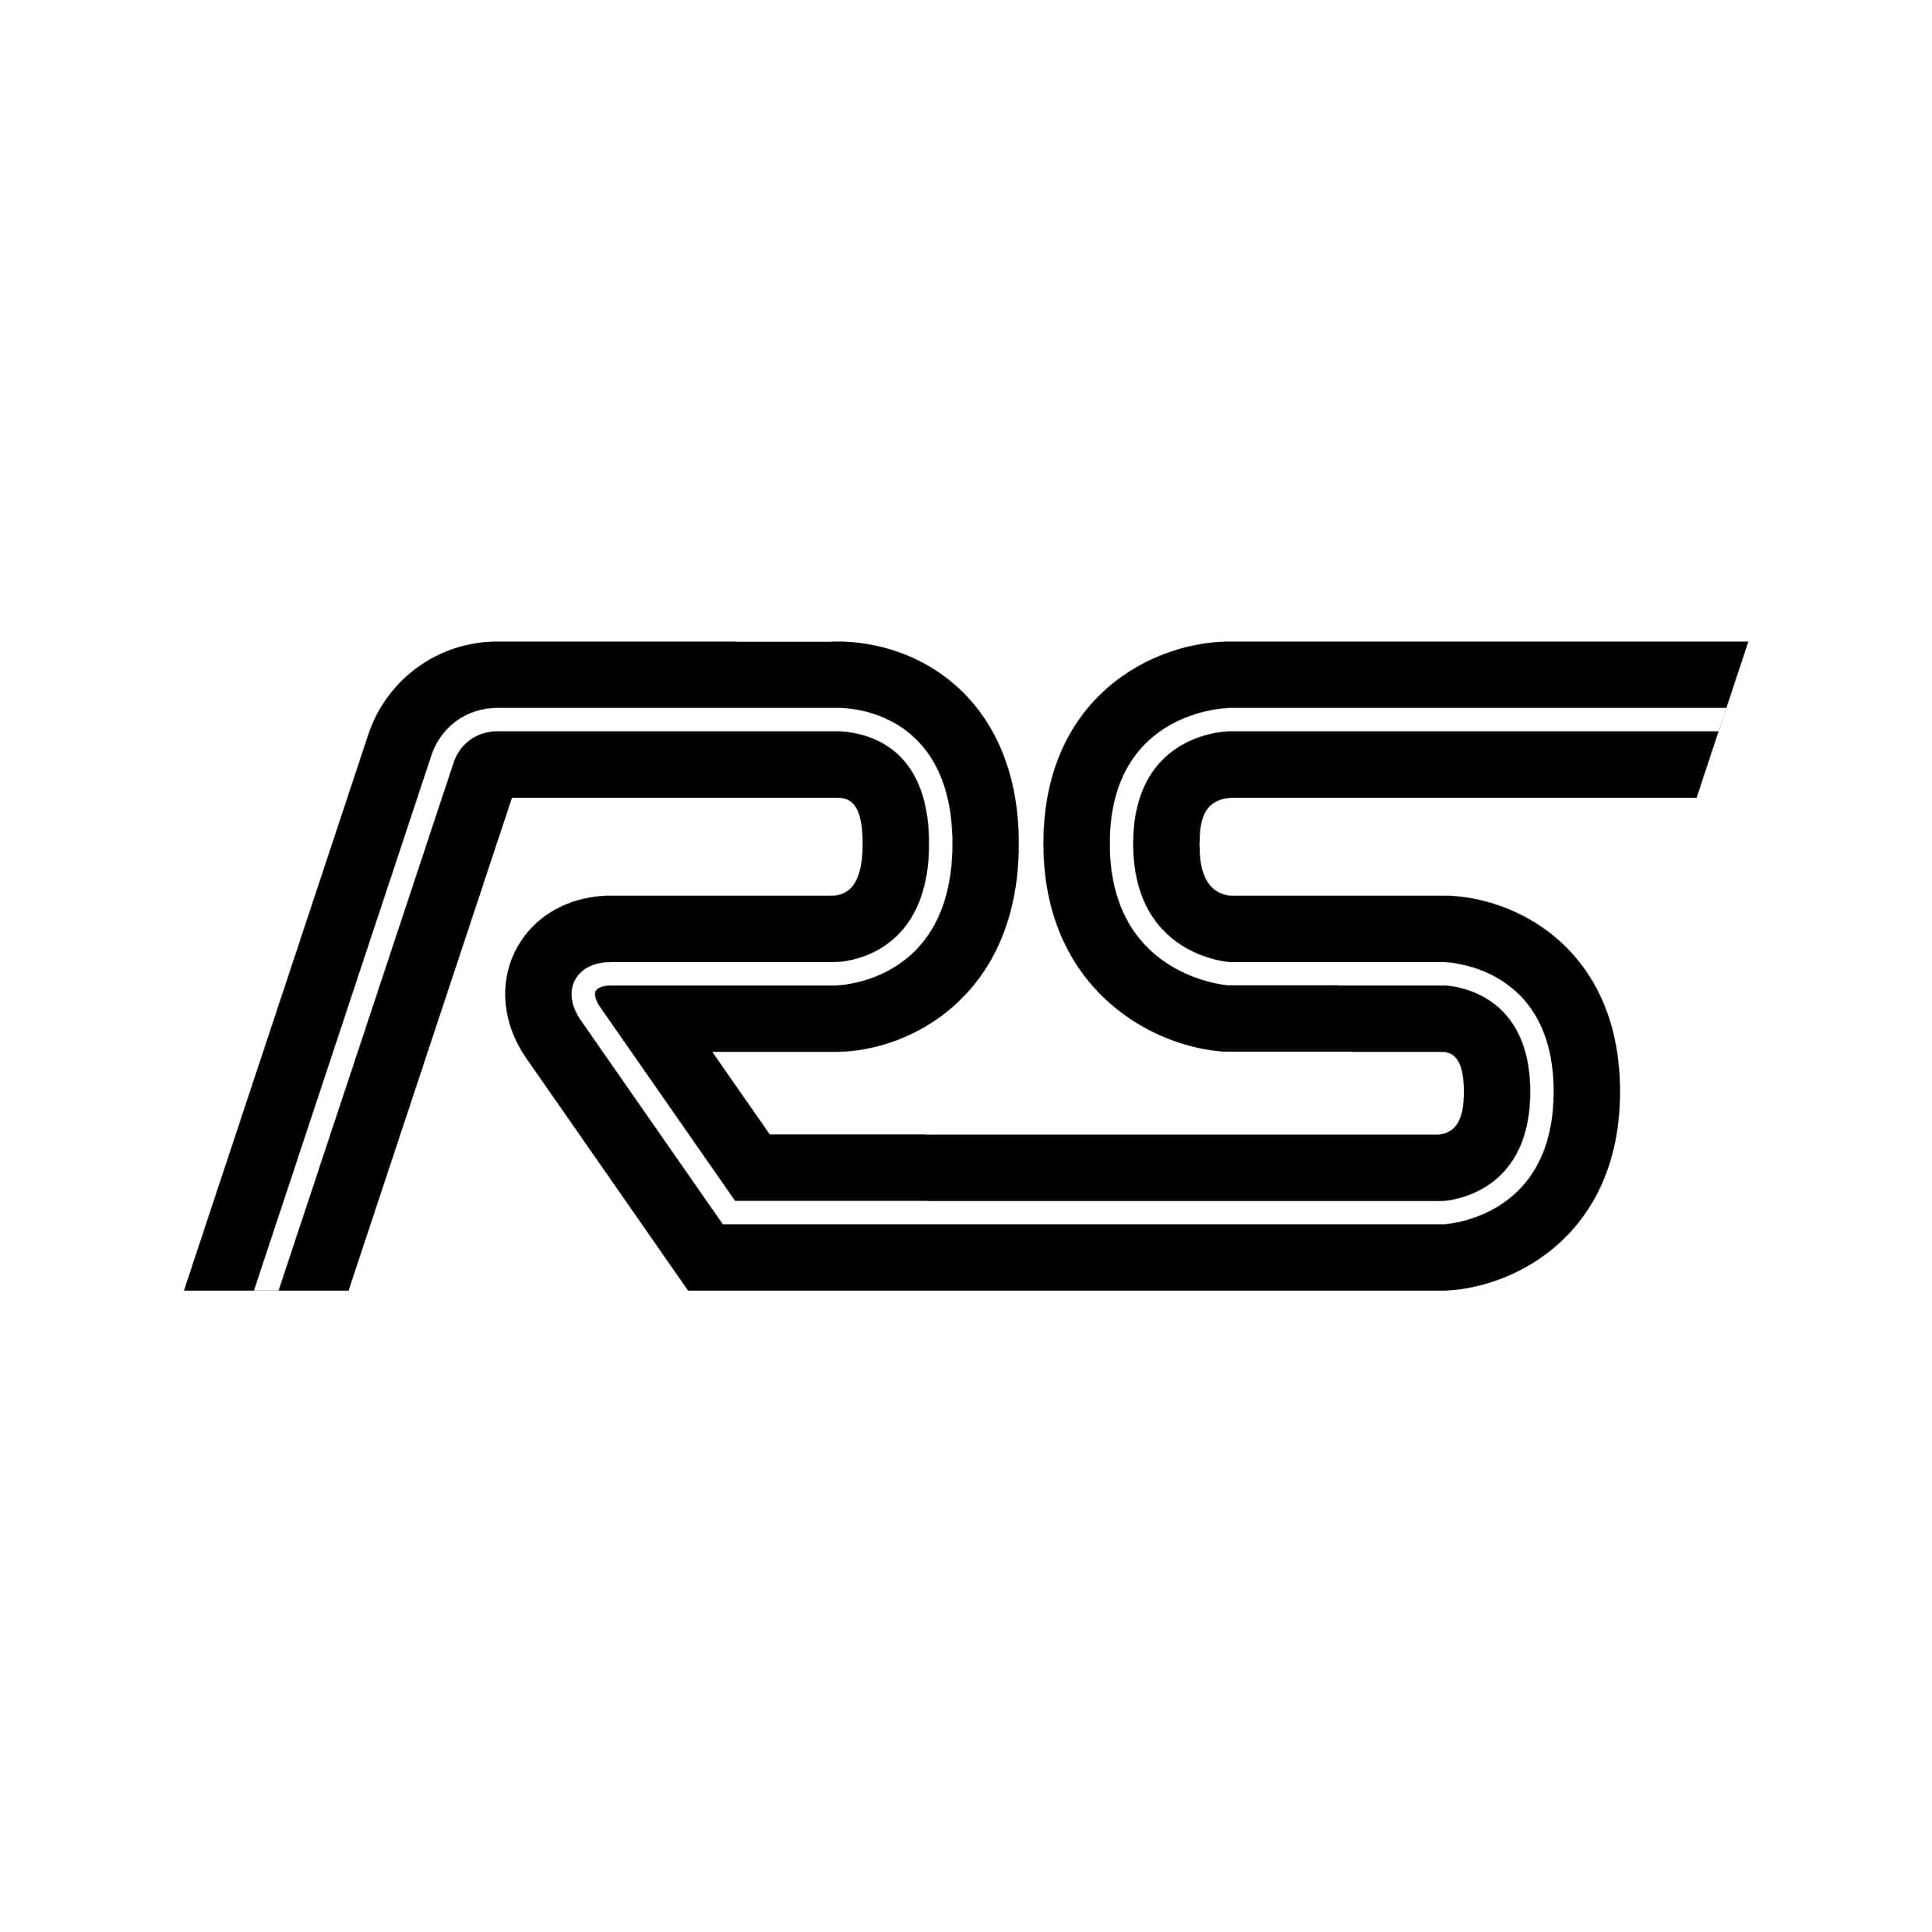 stickers-ford-rs-ref6-autocollant-voiture-sticker-auto-autocollants-decals-sponsors-racing-tuning-sport-logo-min